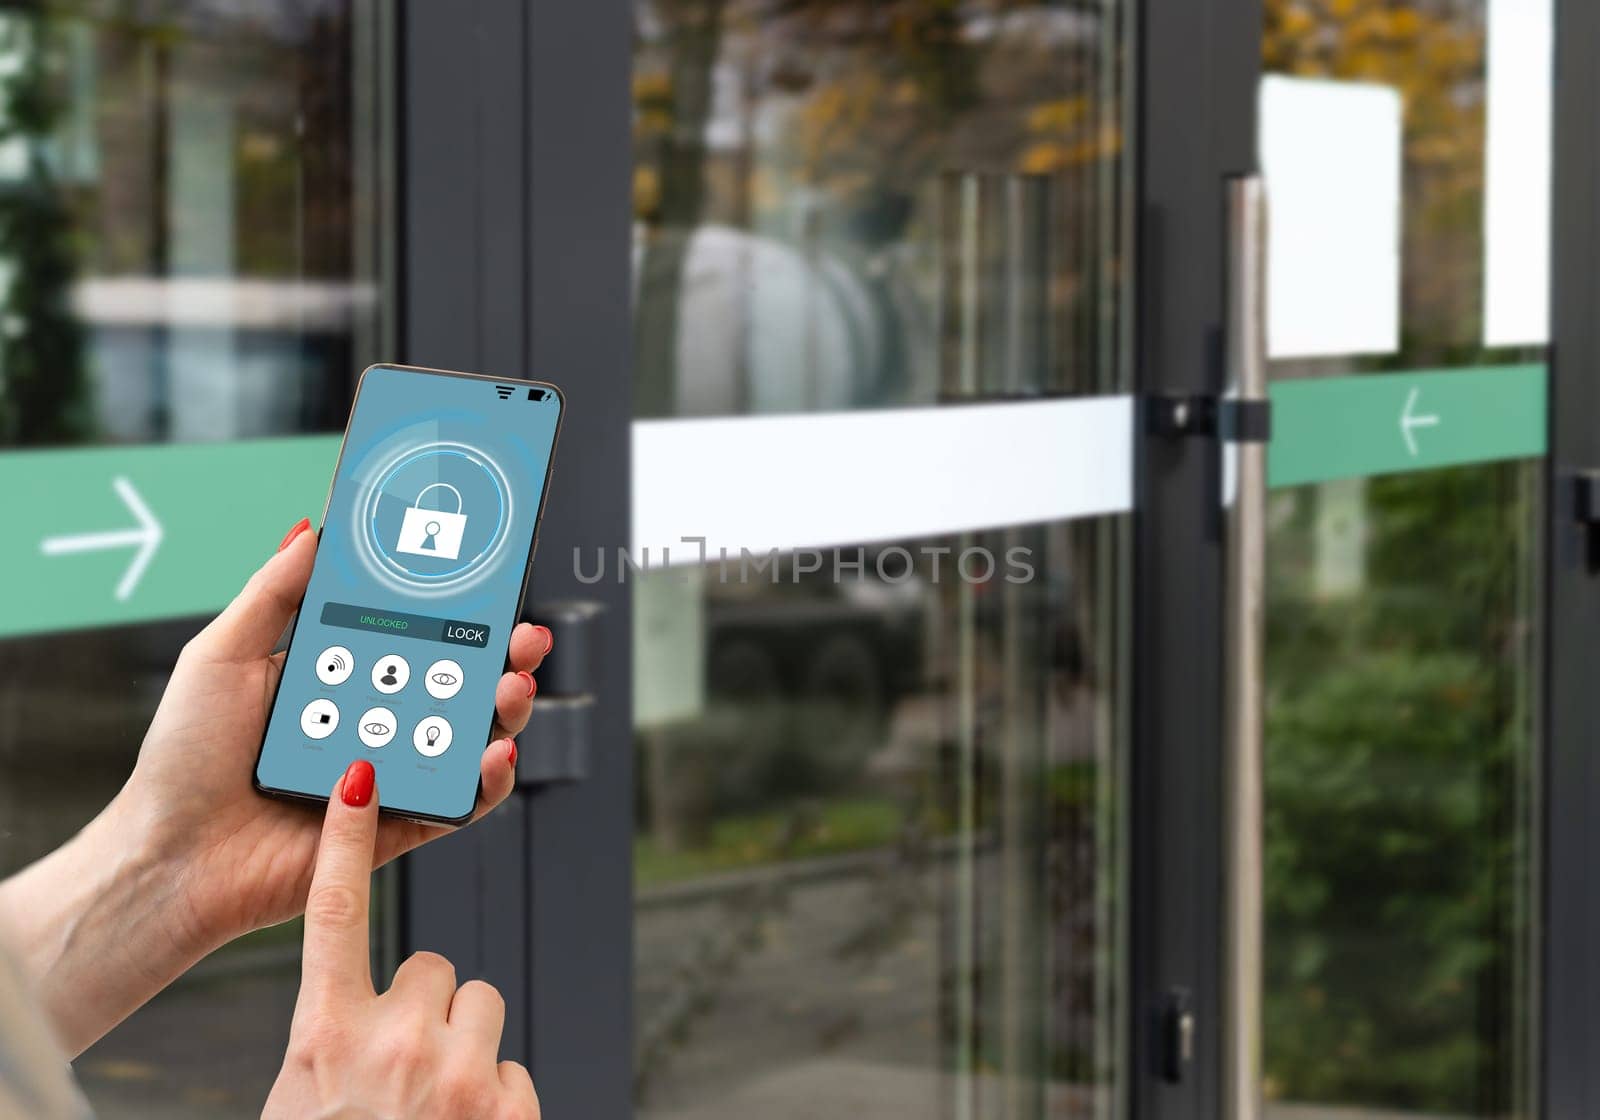 Cropped image of female entering secret key code for getting access and passing building using application on mobile phone, woman pressing buttons on control panel for disarming smart home system.